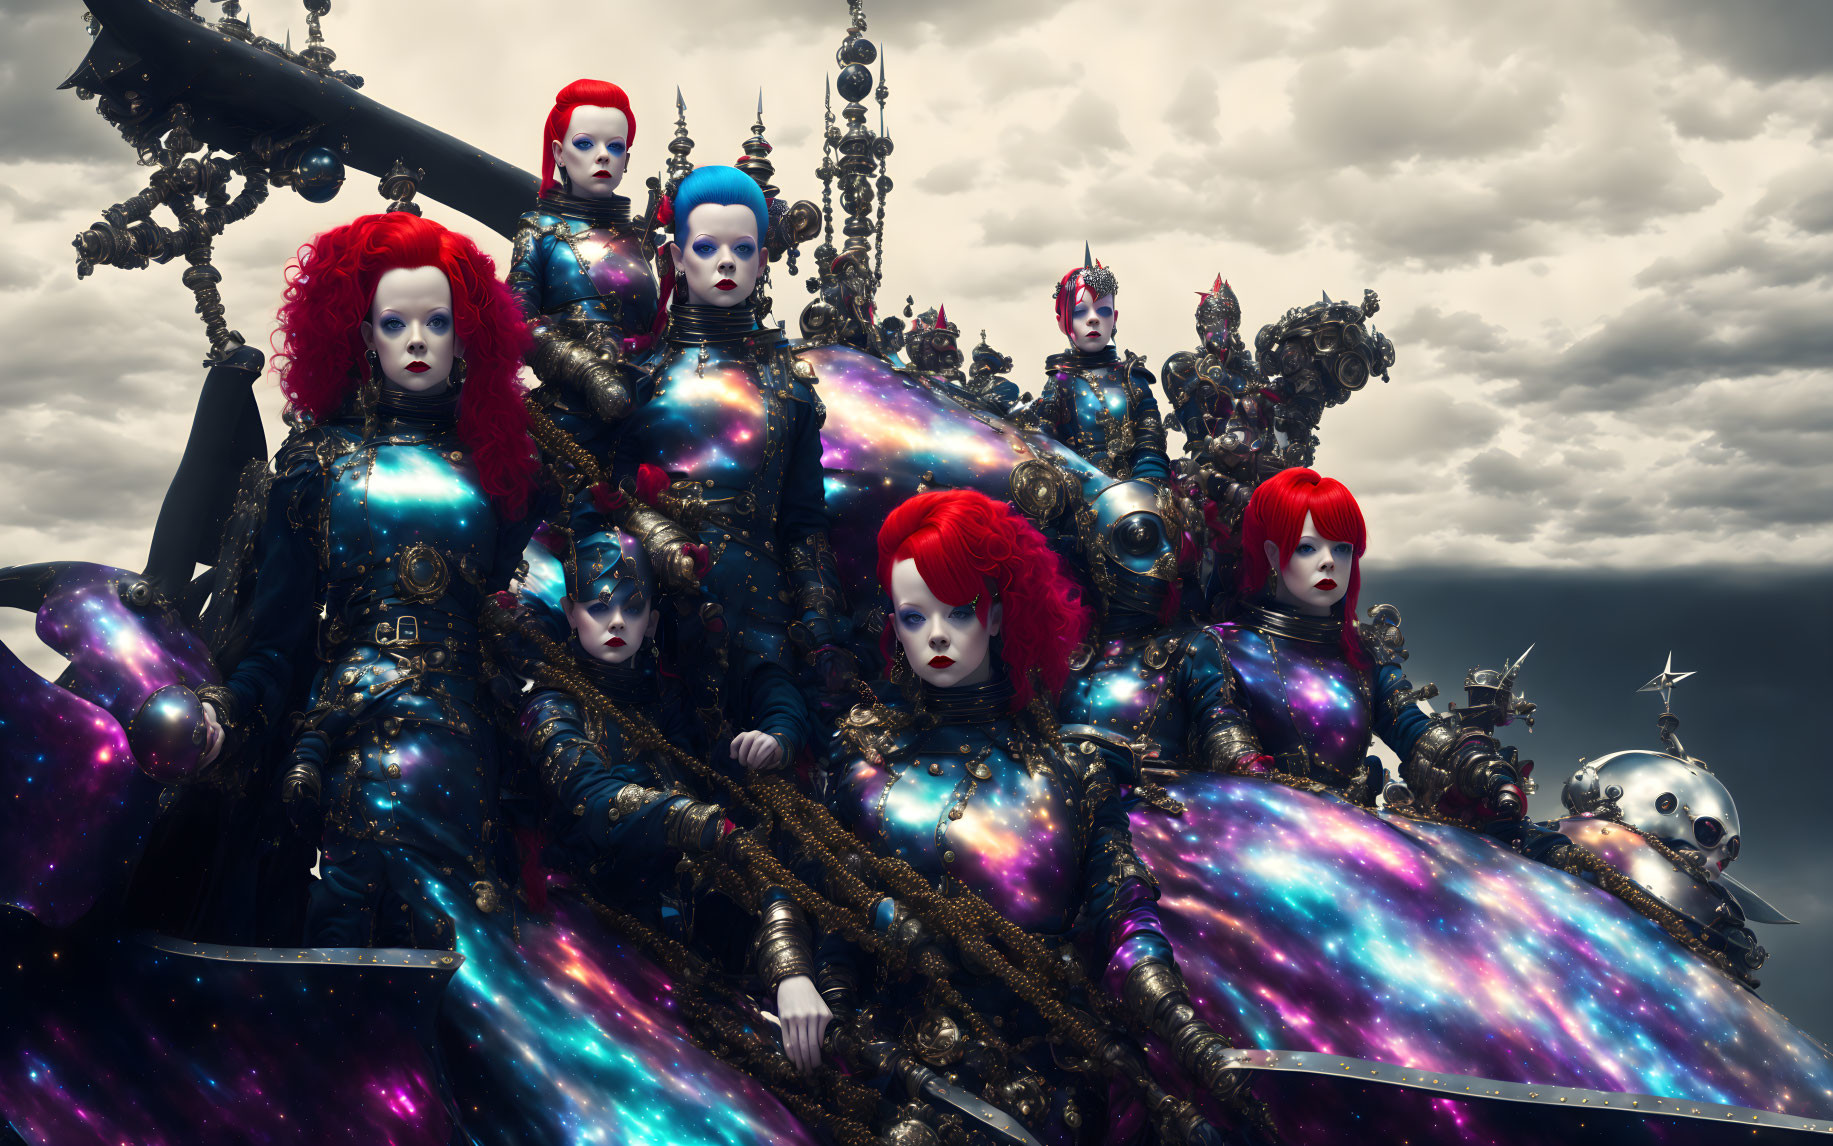 Androgynous figures with red hair and cosmic costumes against stormy sky